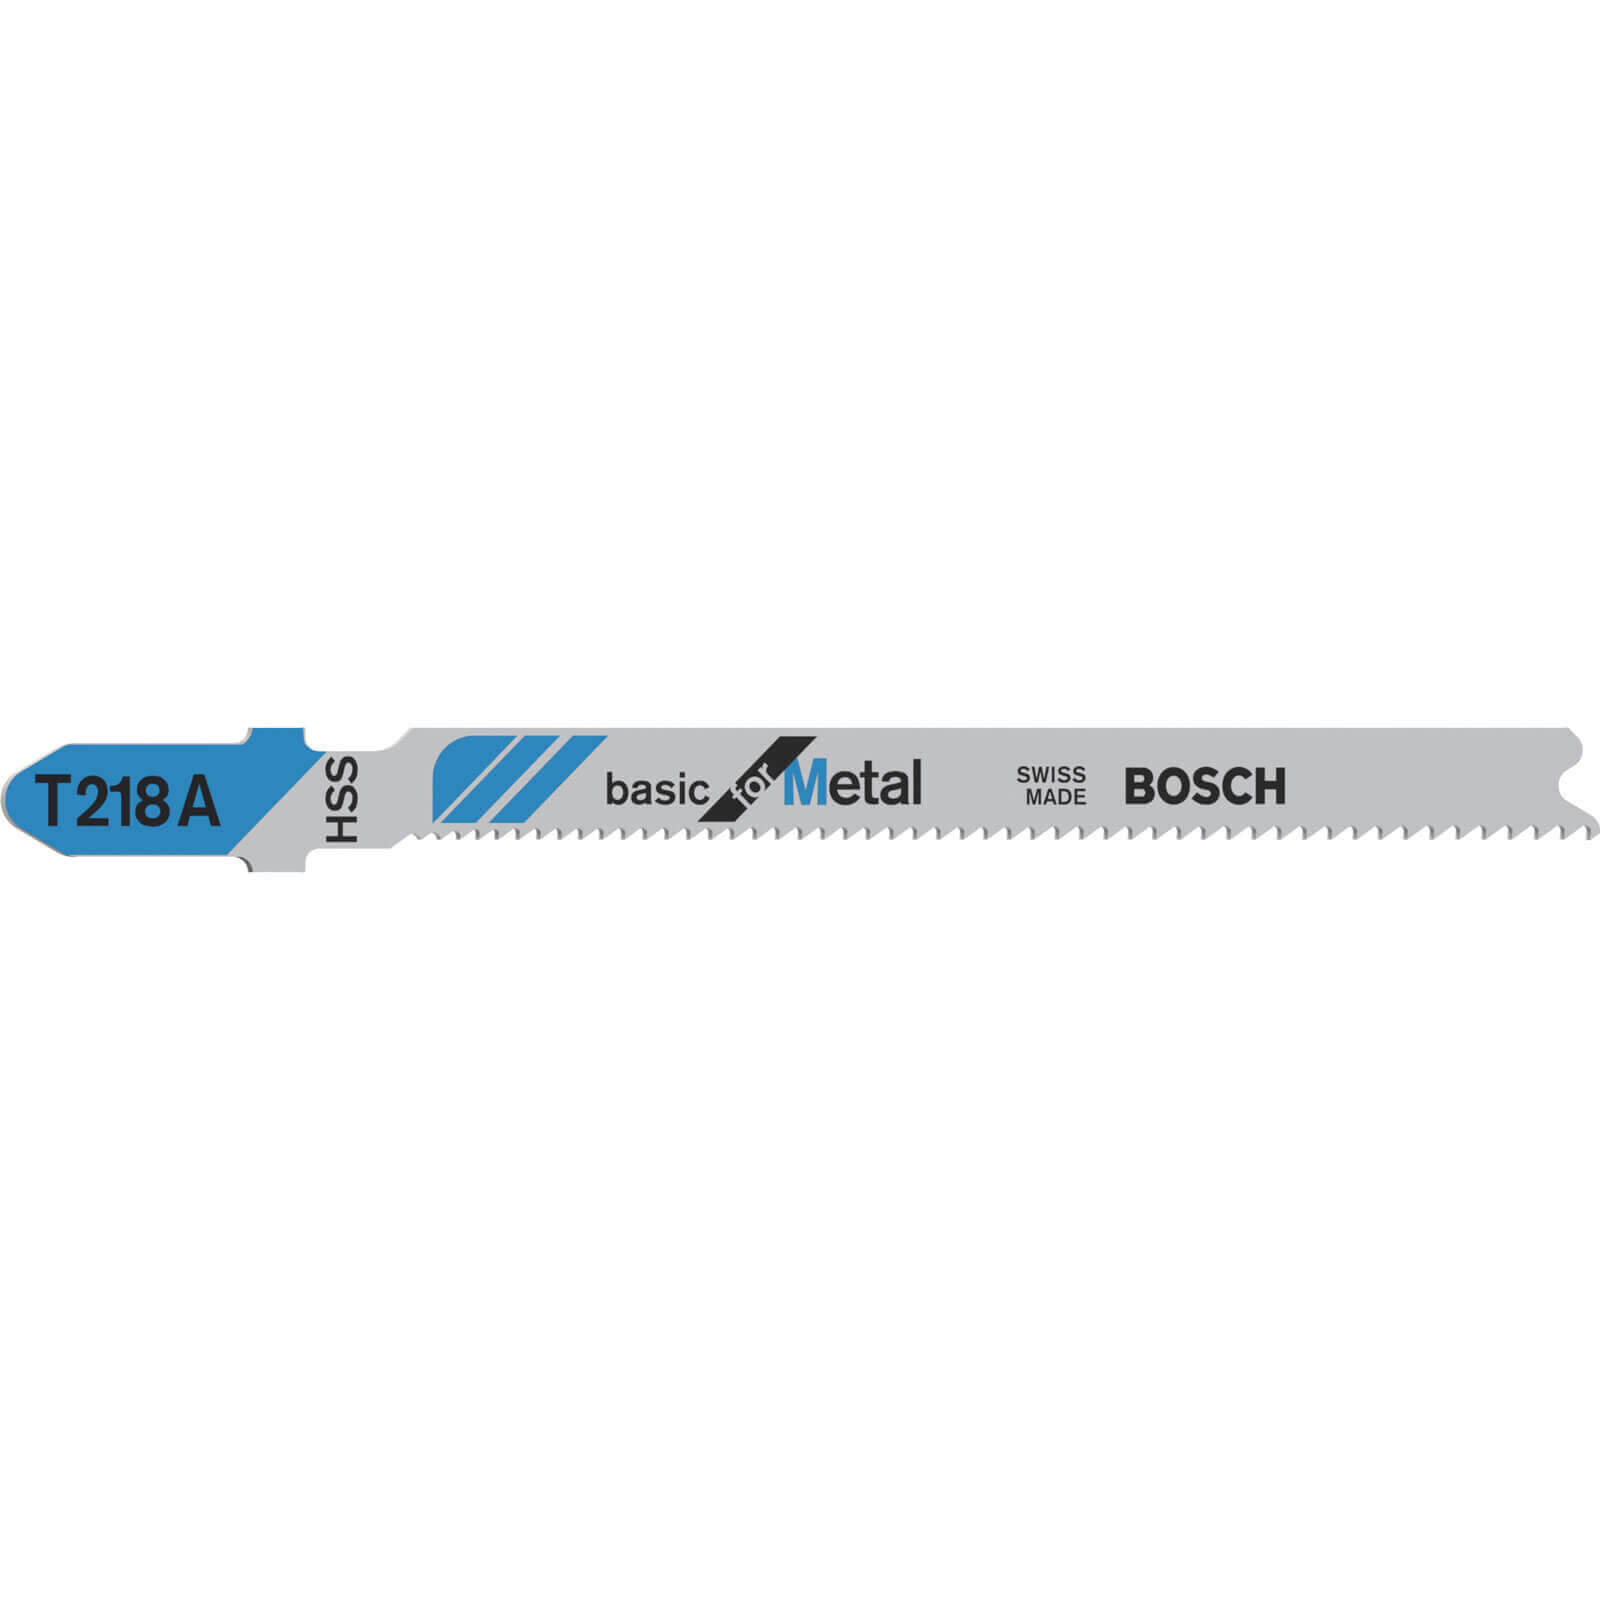 Image of Bosch T218 A Metal Cutting Jigsaw Blades Pack of 3